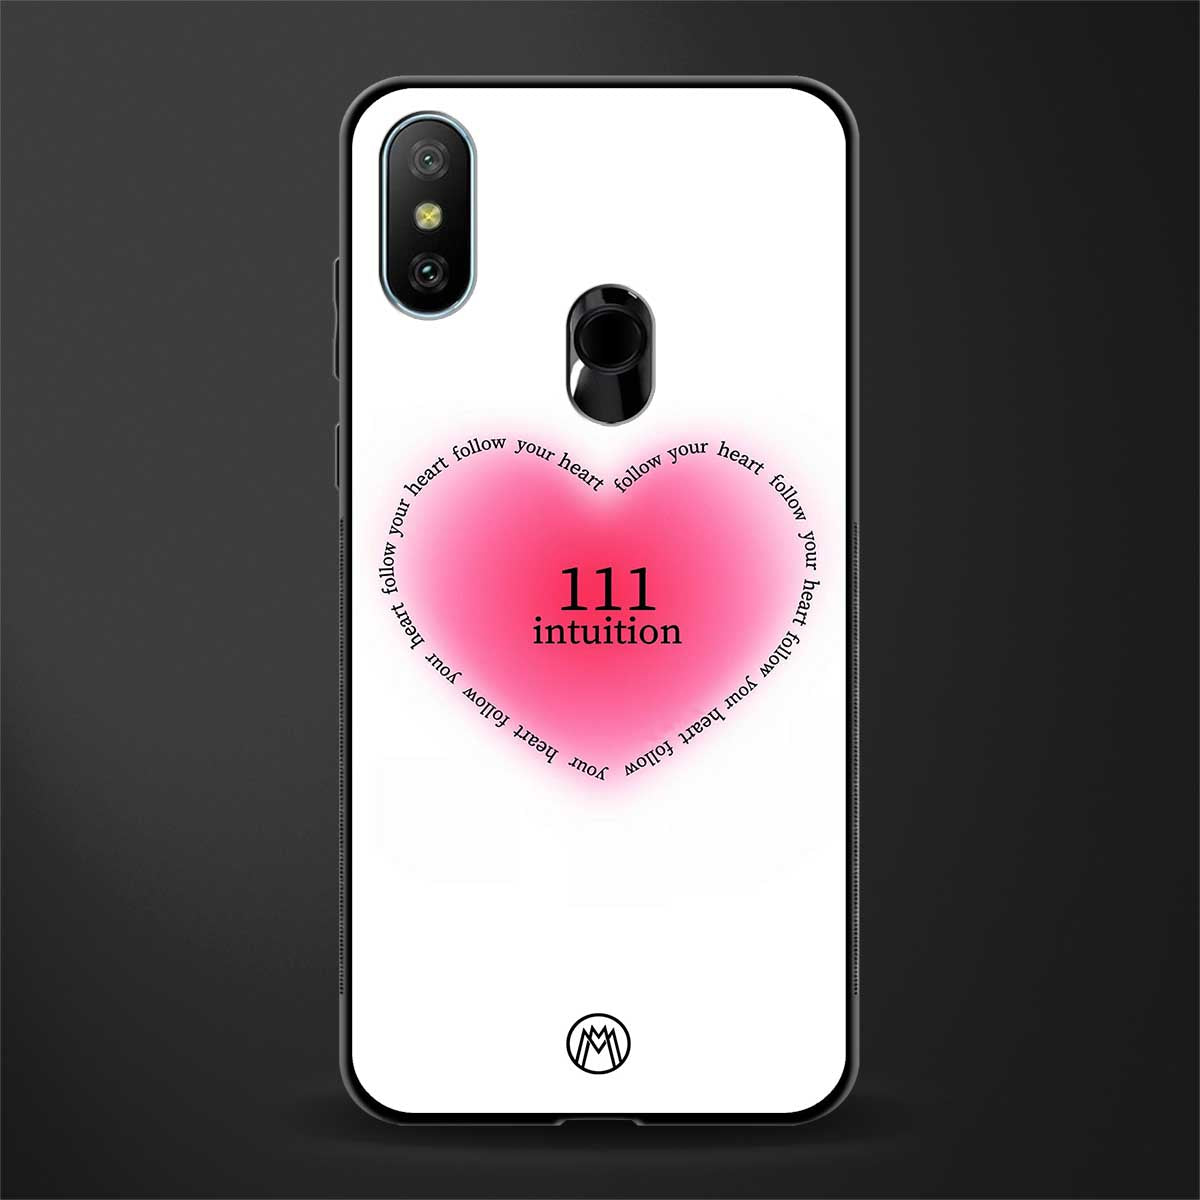 111 intuition glass case for redmi 6 pro image